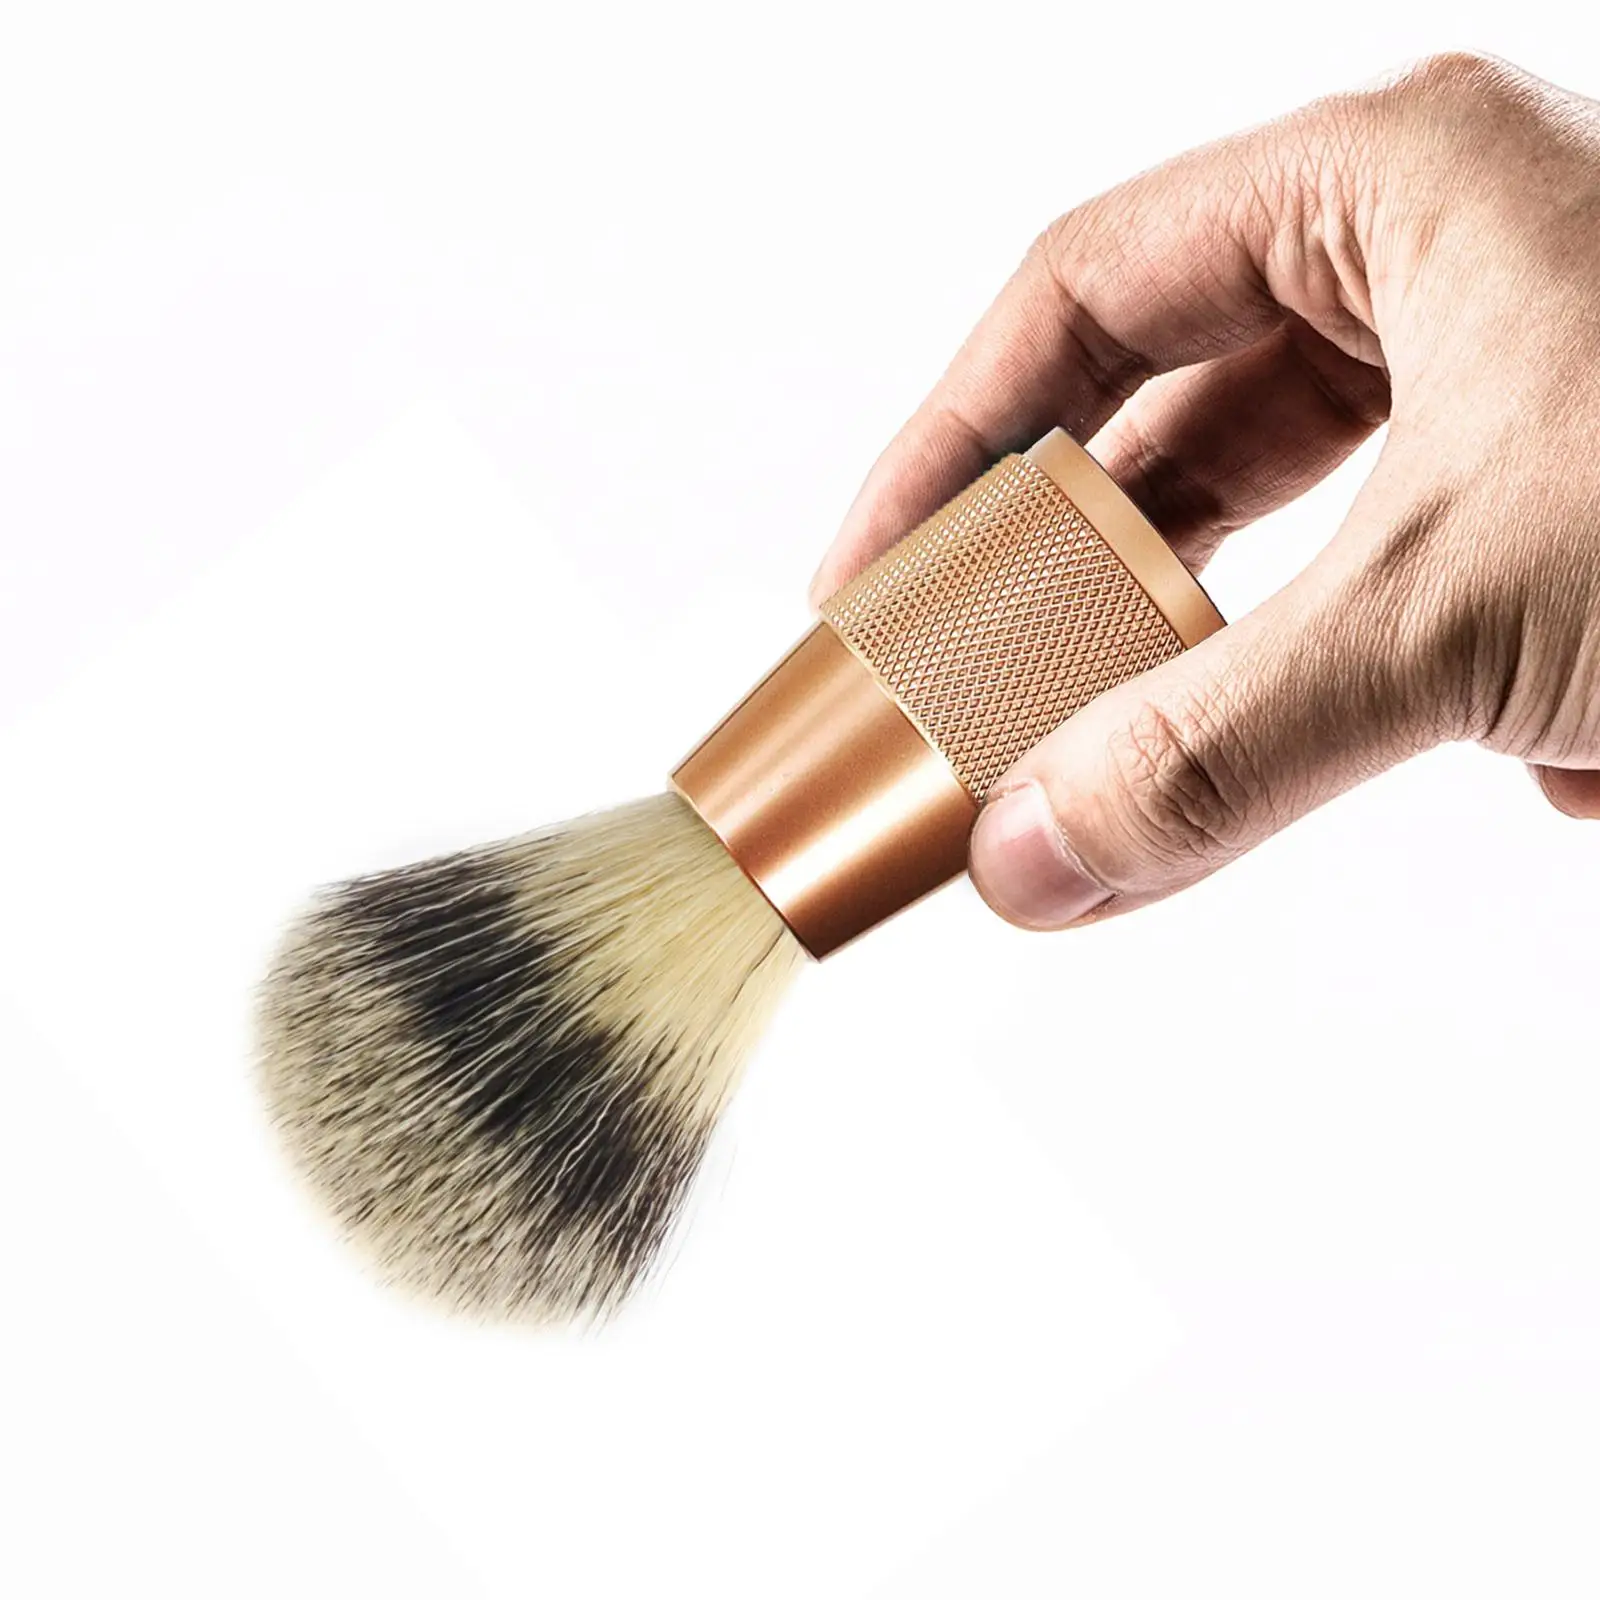 Shaving Brush for Men Comfortable Father Day Gifts Height 11cm Soft Nylon Bristles Handled Face Hair Cleaning Metal Handle